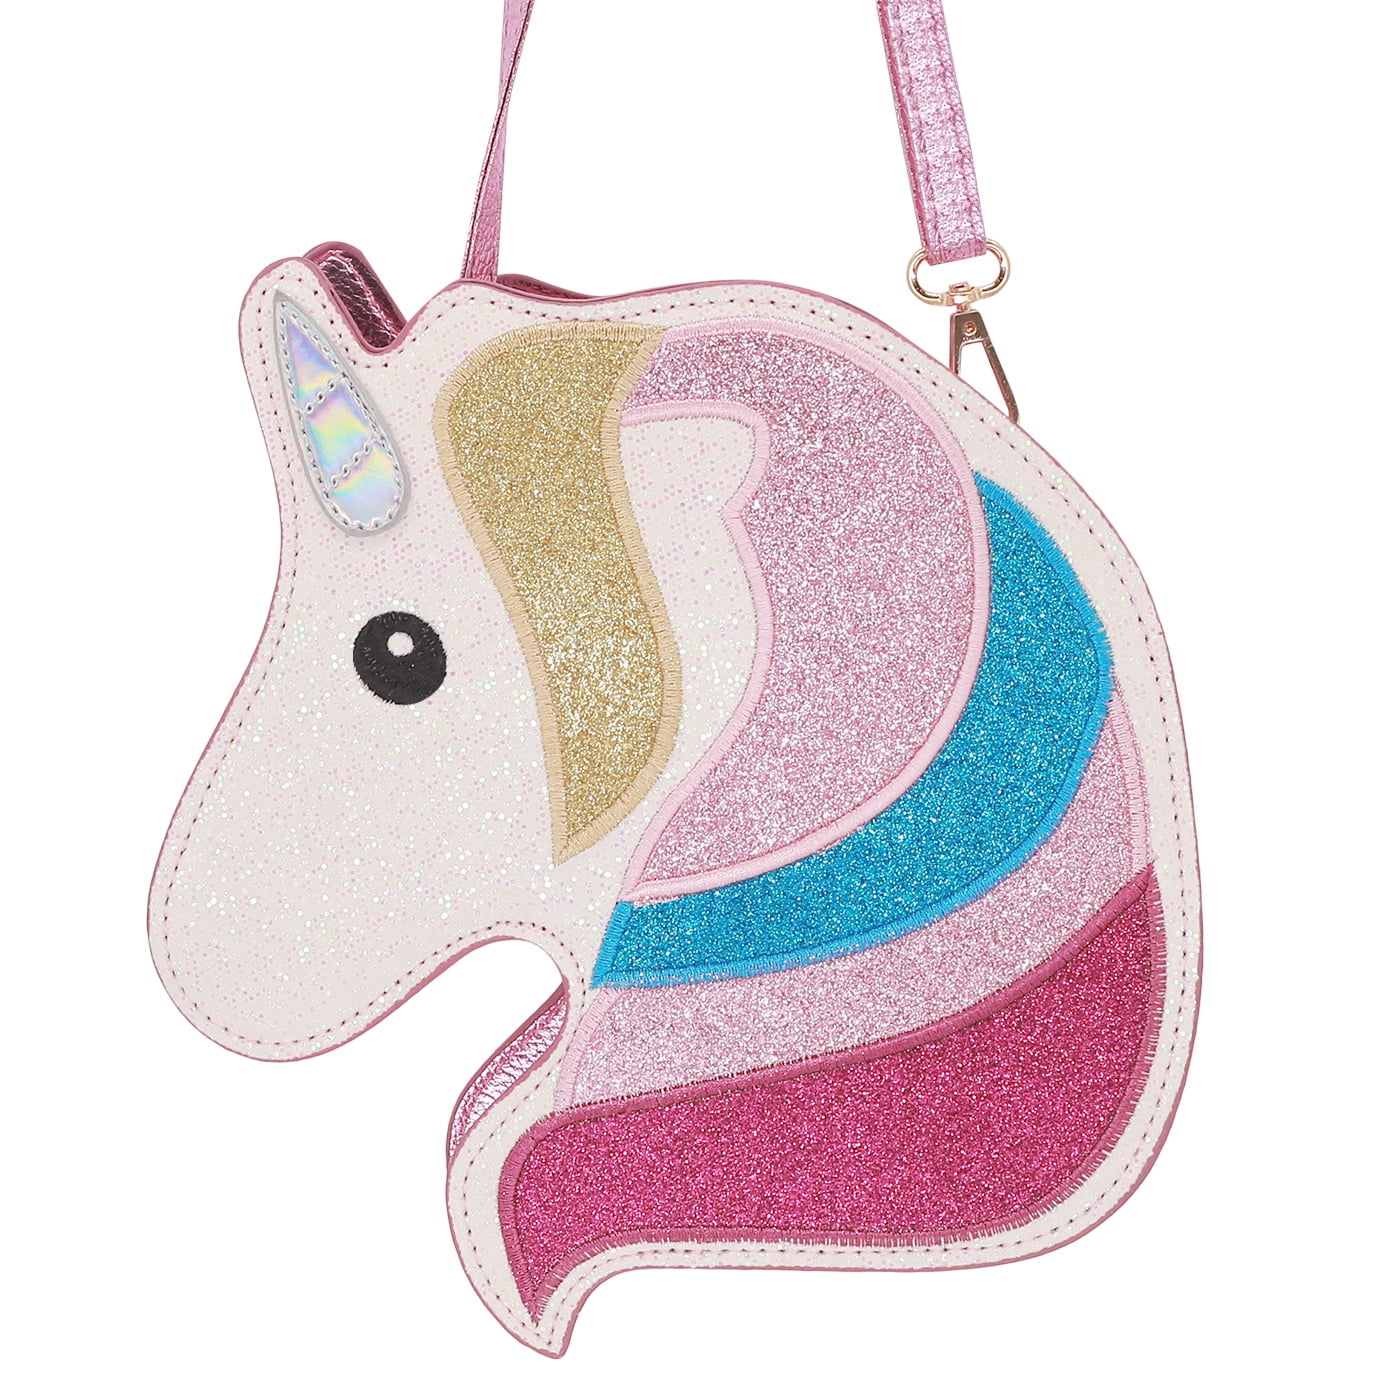 Toddler Kids Quilted Glitter Crossbody Handbags Purse Gifts Unicorn for Girls